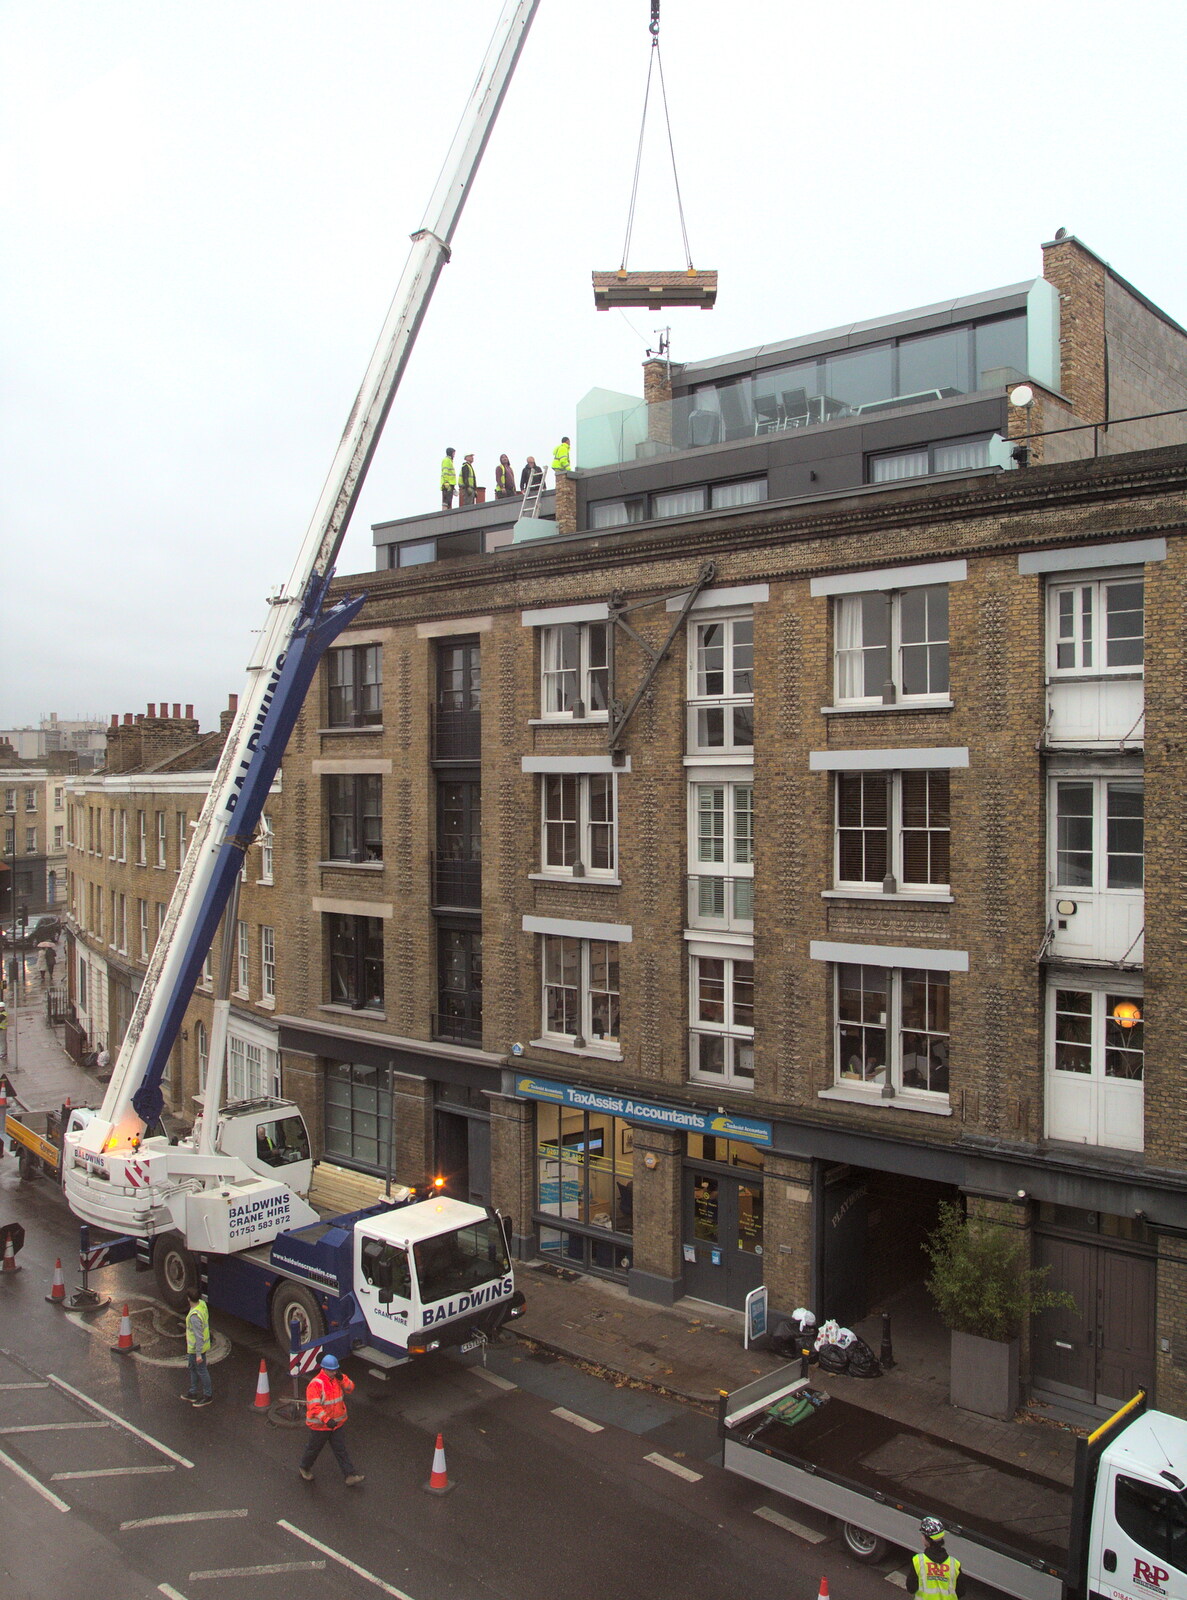 The hot-tub's base is lifted up from Hot-tub Penthouse, Thornham Walks, and Building, London and Suffolk - 12th November 2015